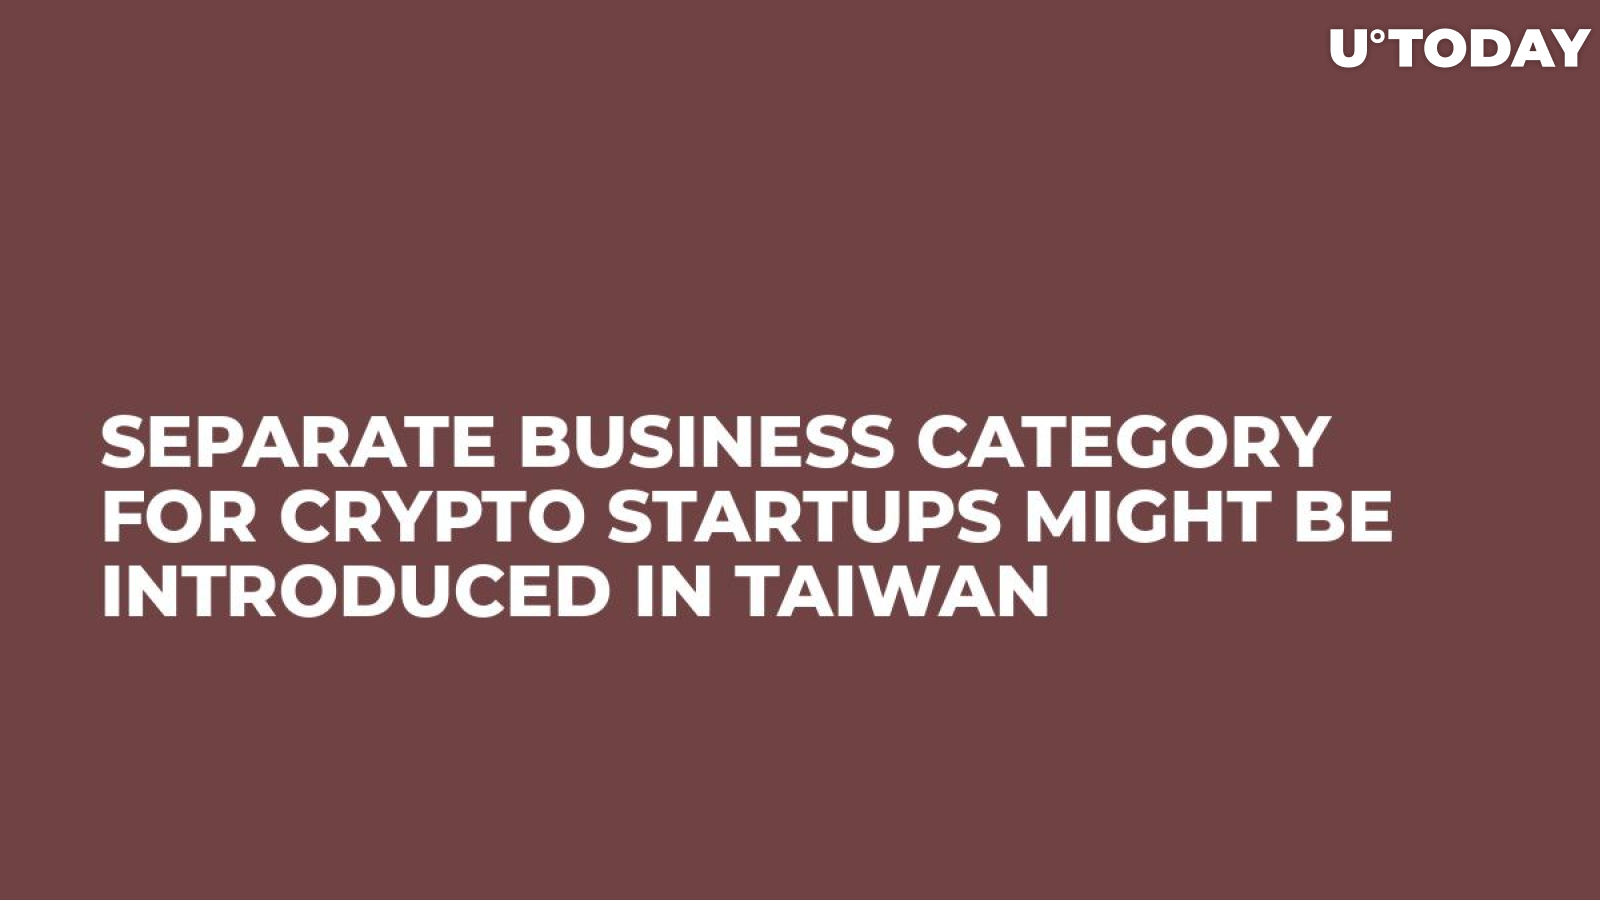 Separate Business Category For Crypto Startups Might Be Introduced in Taiwan